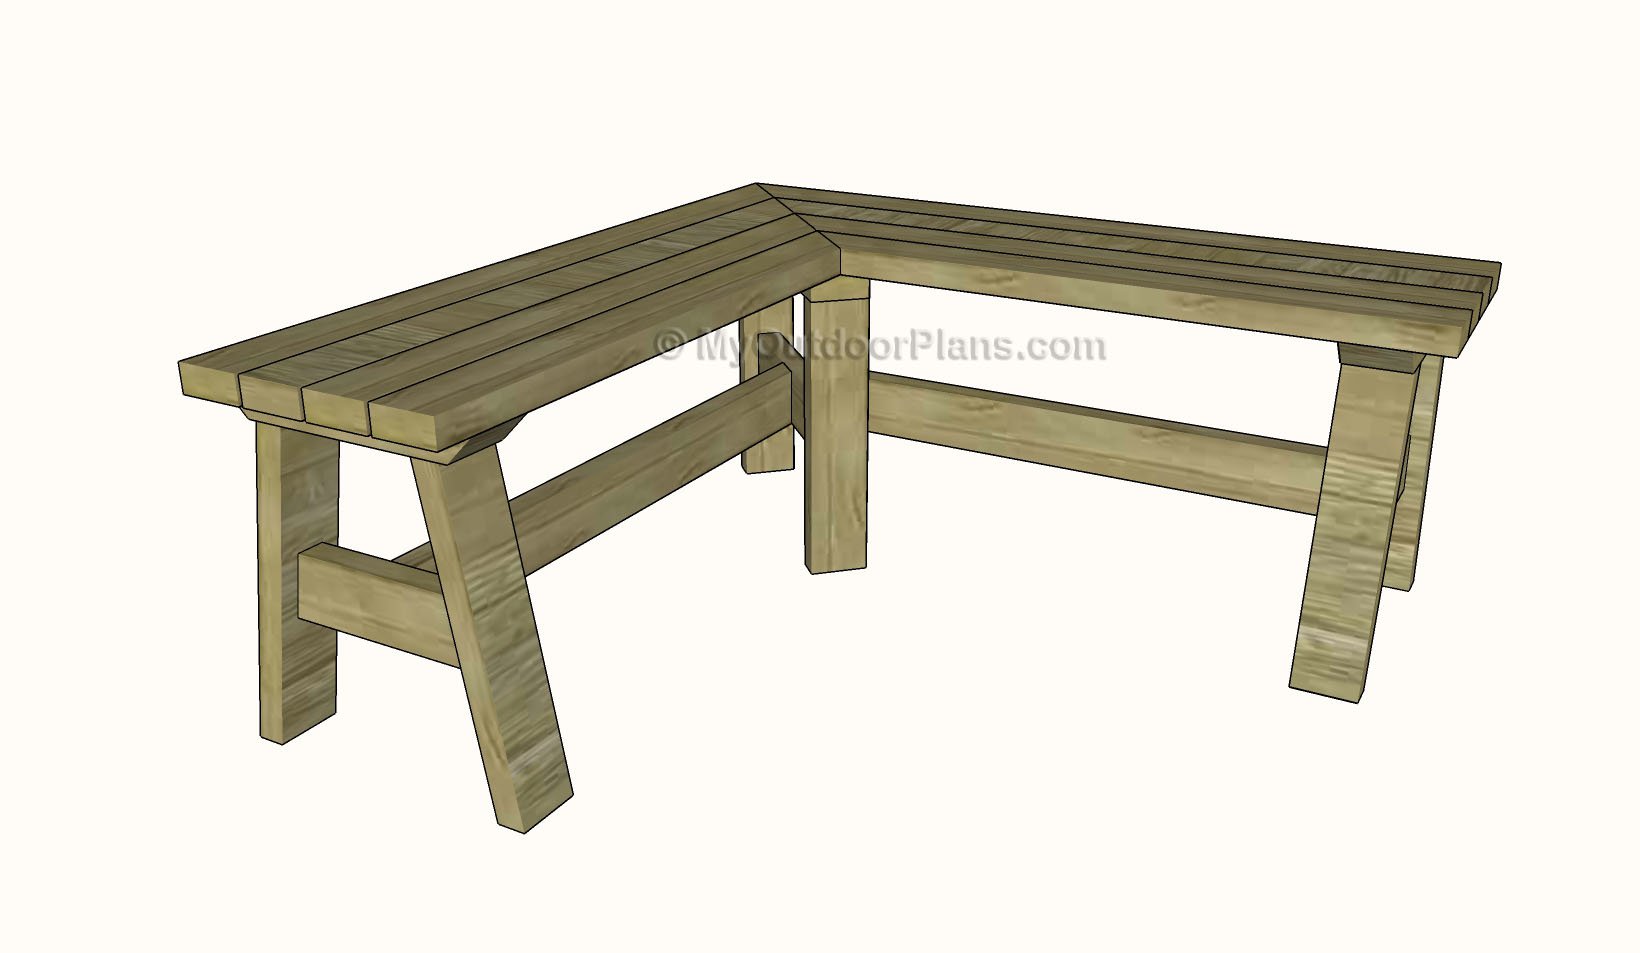 corner bench plans corner outdoor sectional plans double chair bench ...